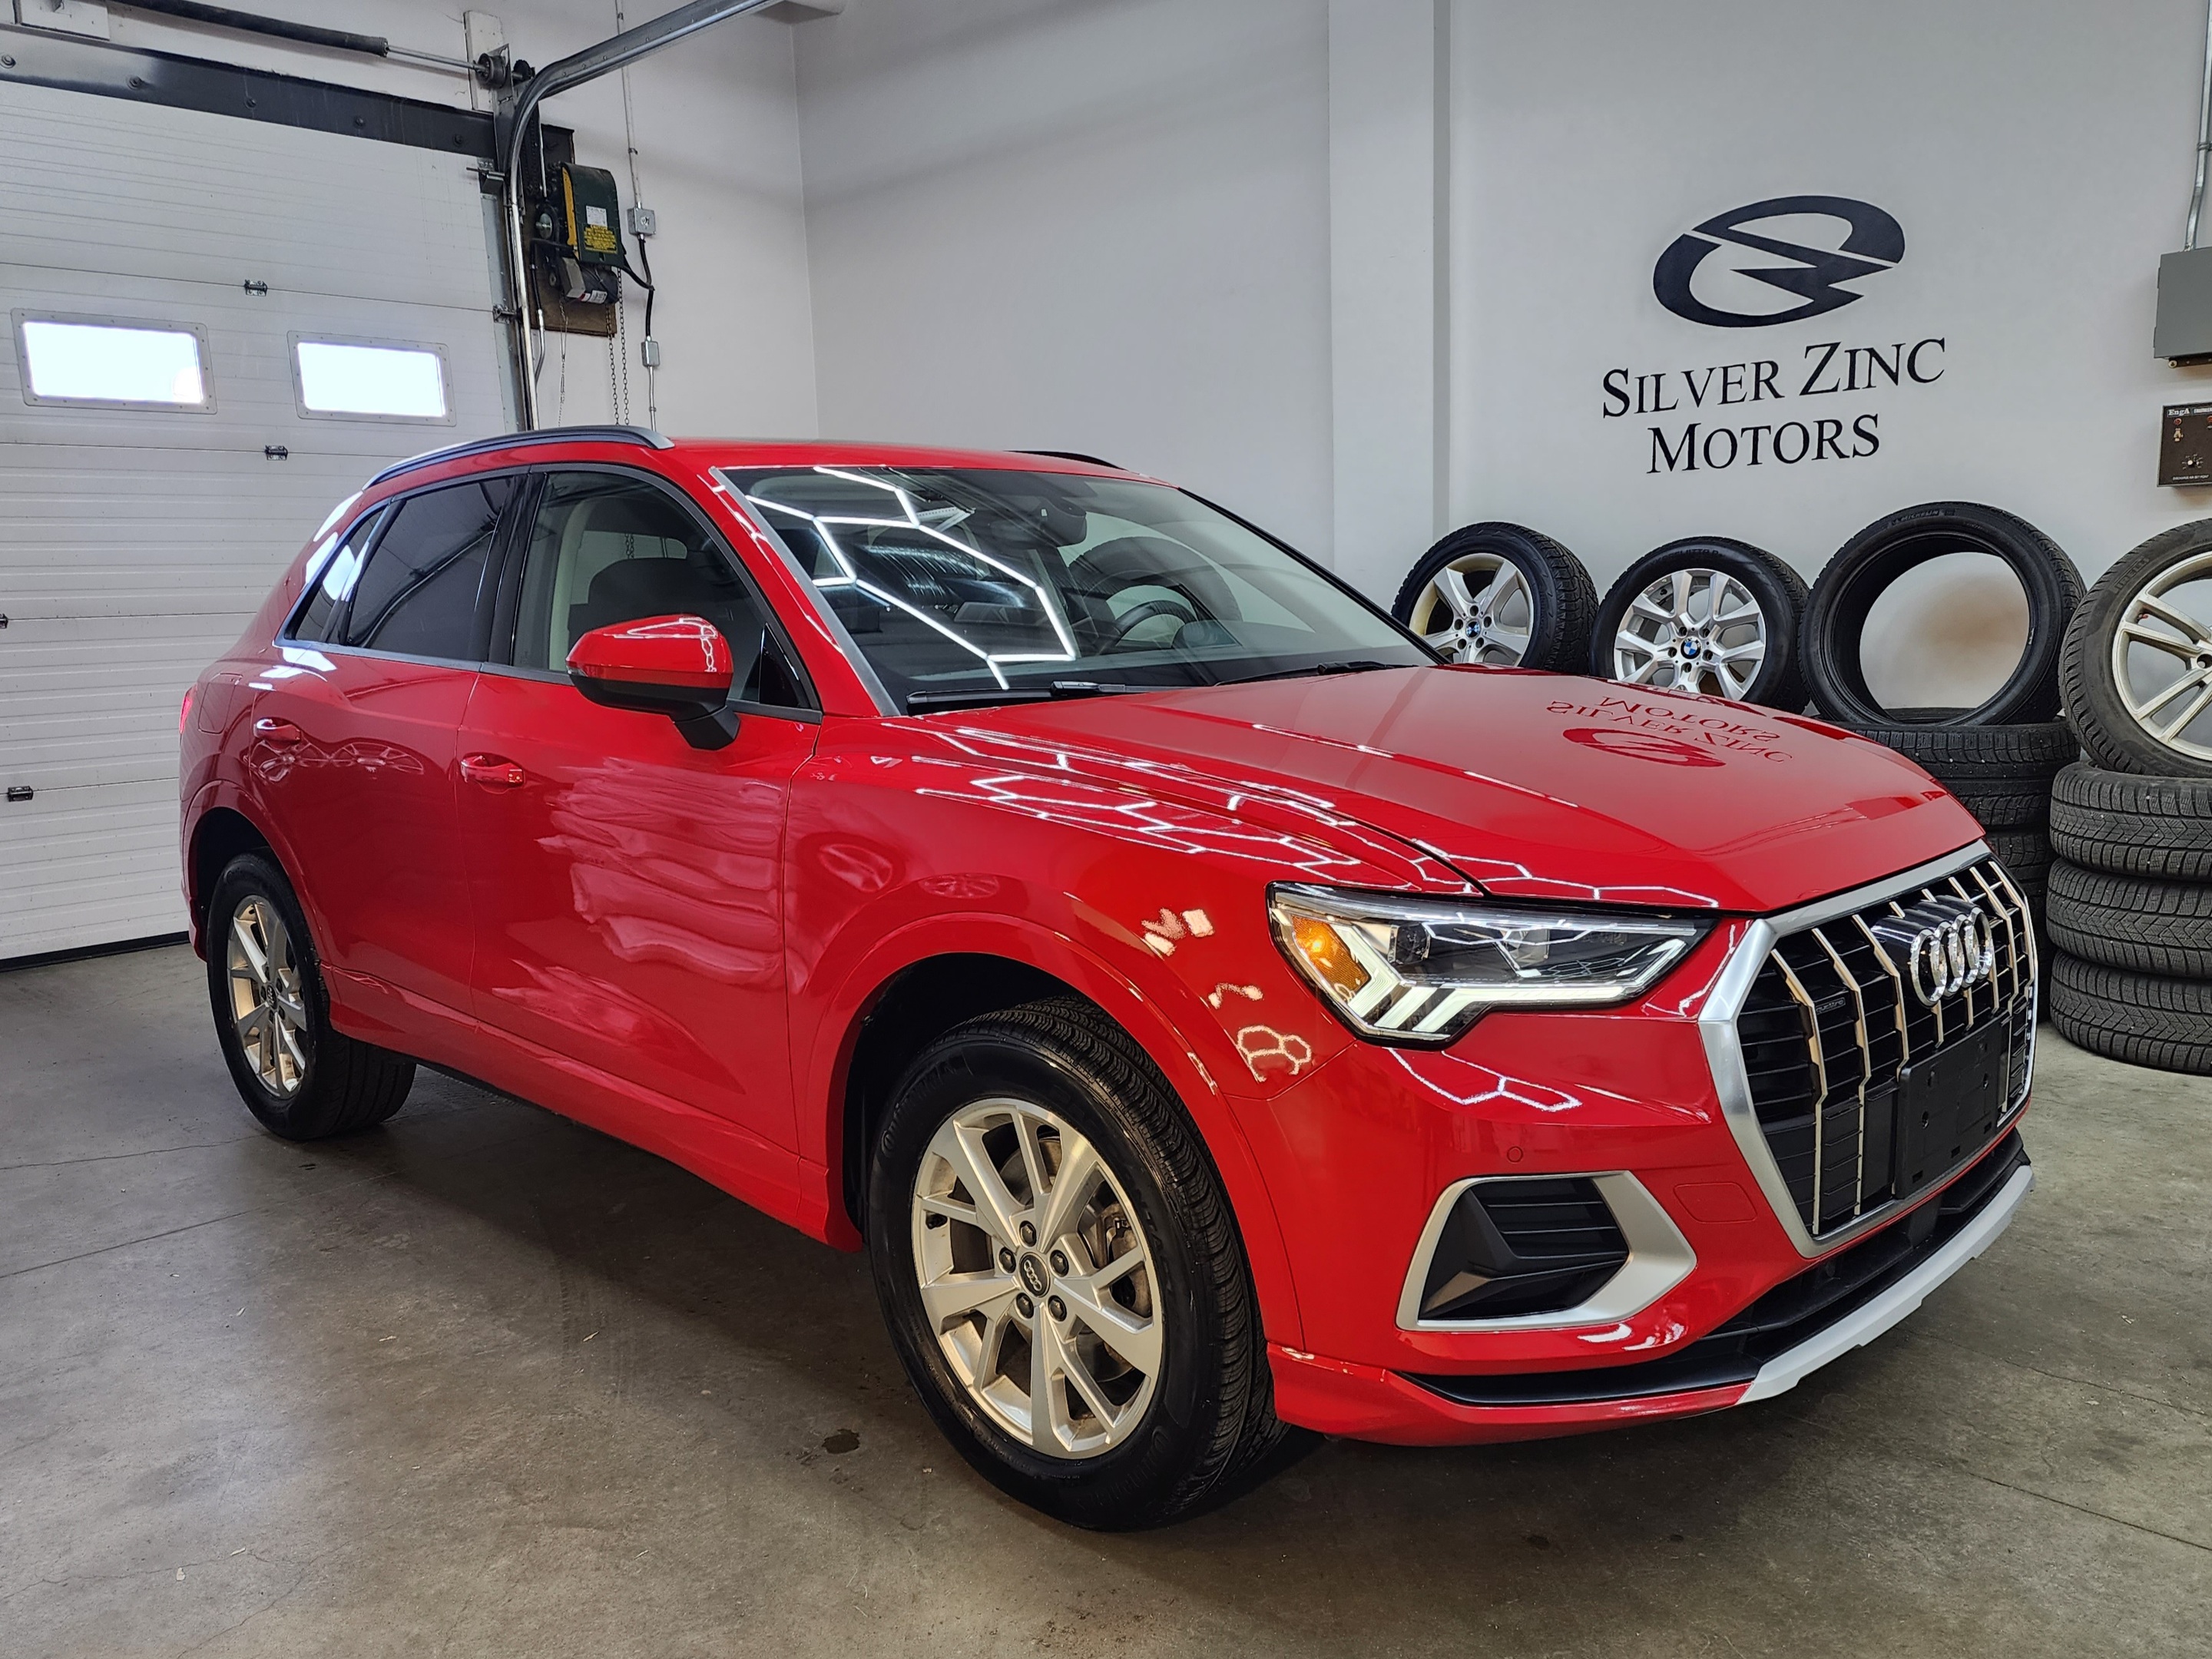 2020 Audi Q3 Factory Warranty, Inspected and Carfax